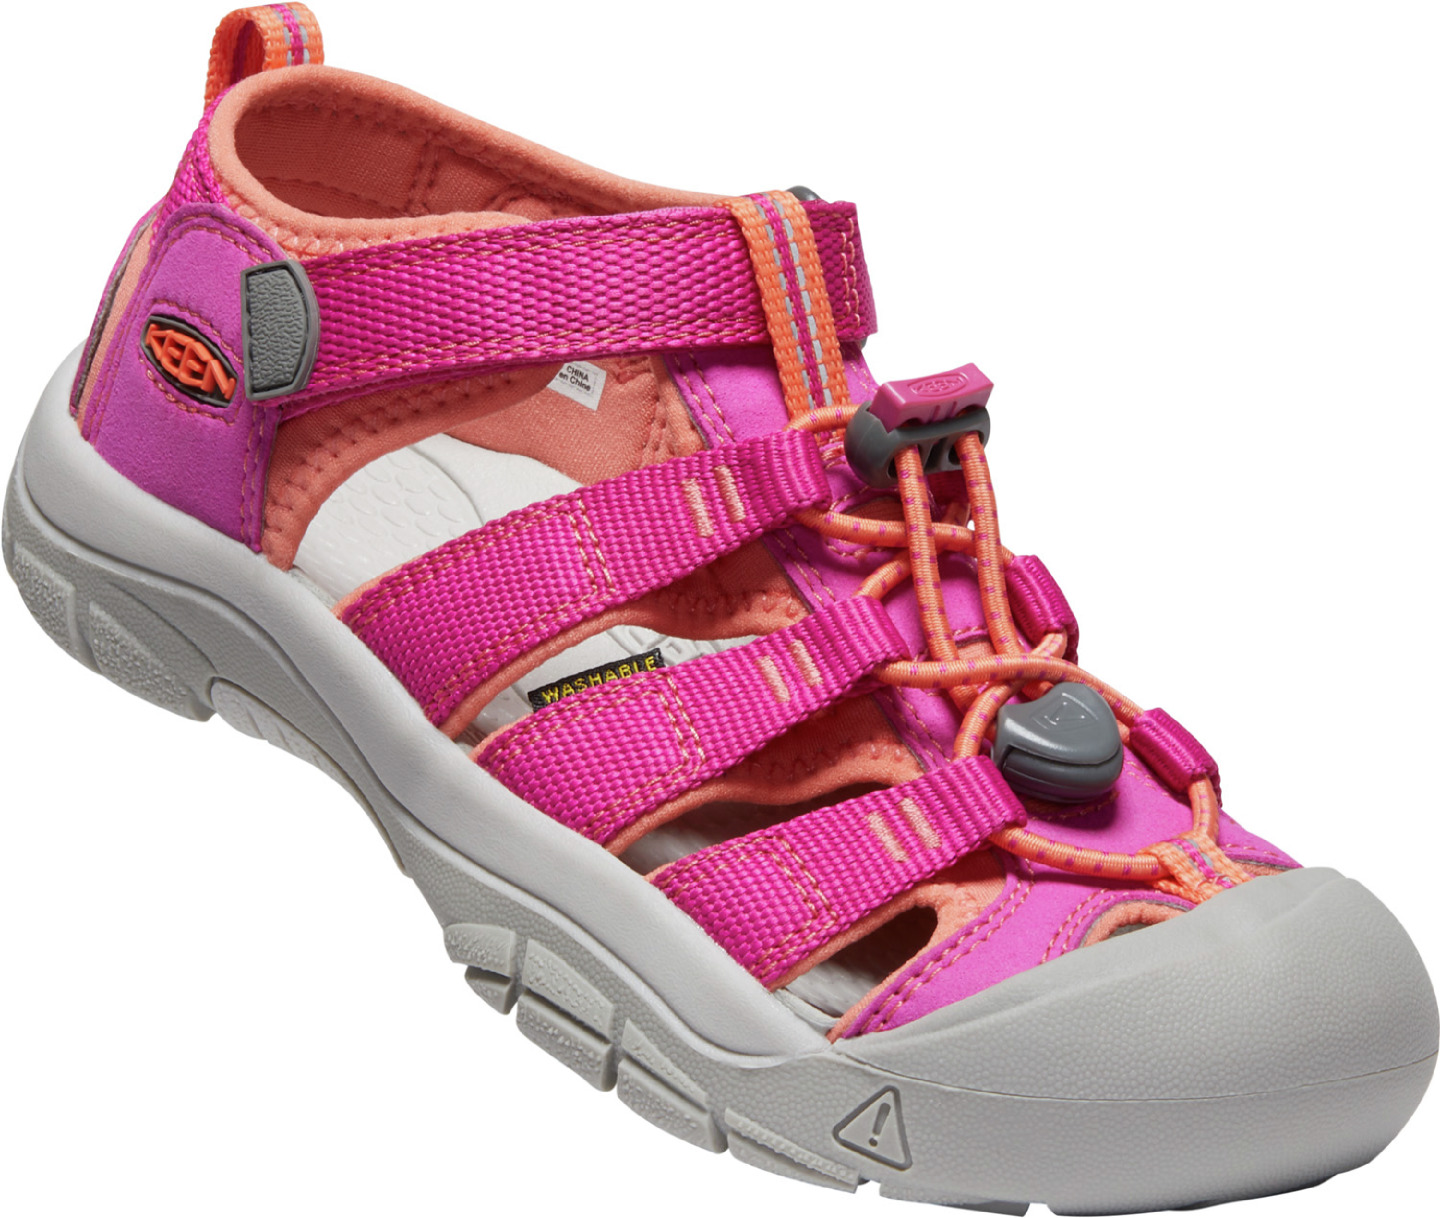 Keen dětské sandály Newport H2 Youth Very Berry/Fusion Coral Barva: very berry/fusion coral, Velikost: 13 UK (32/33 EU / 20 cm)